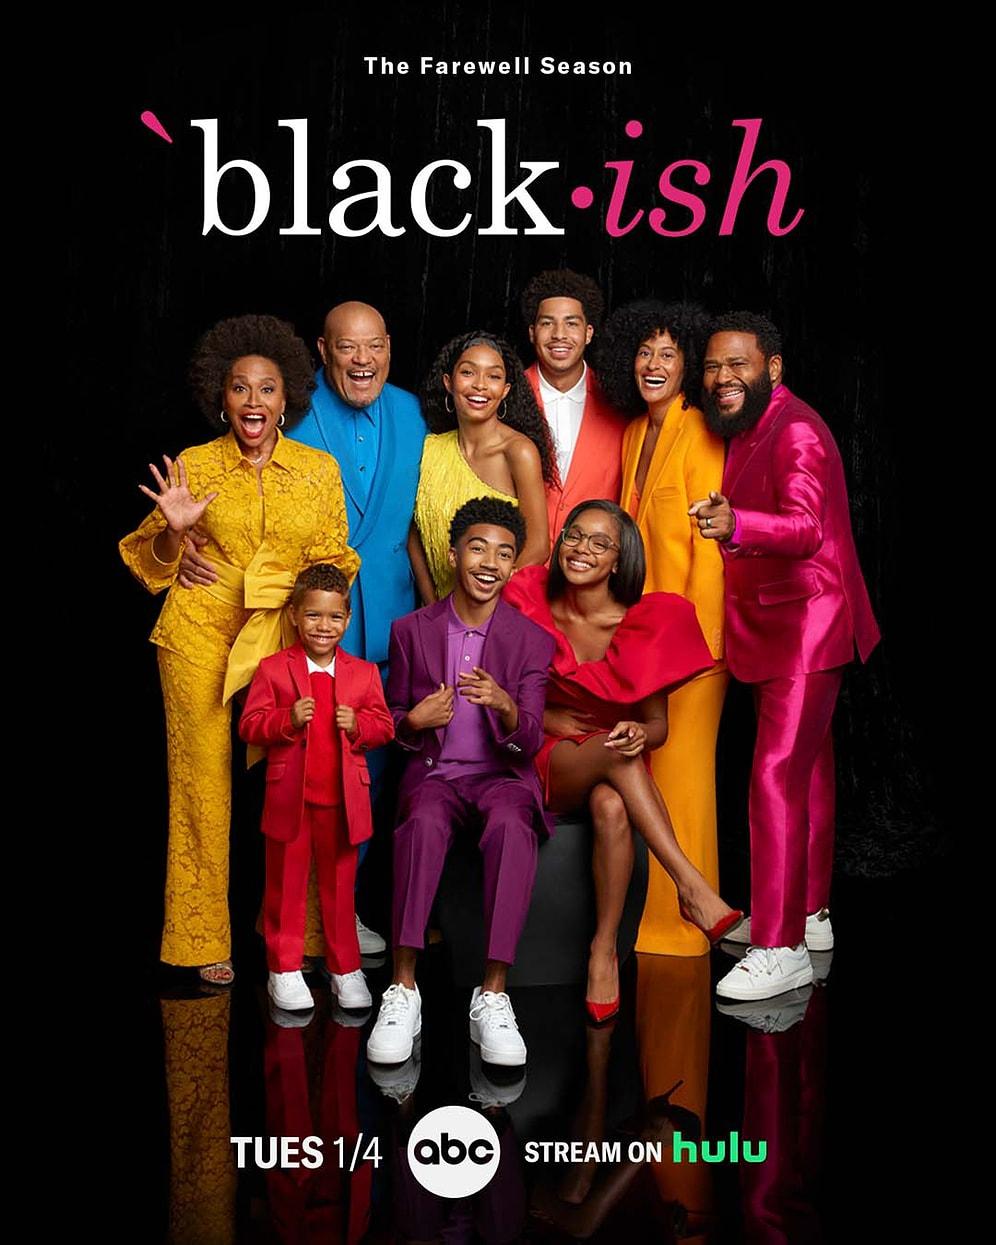 Counting Days To The Premiere of ‘Black-ish’ Series Finale